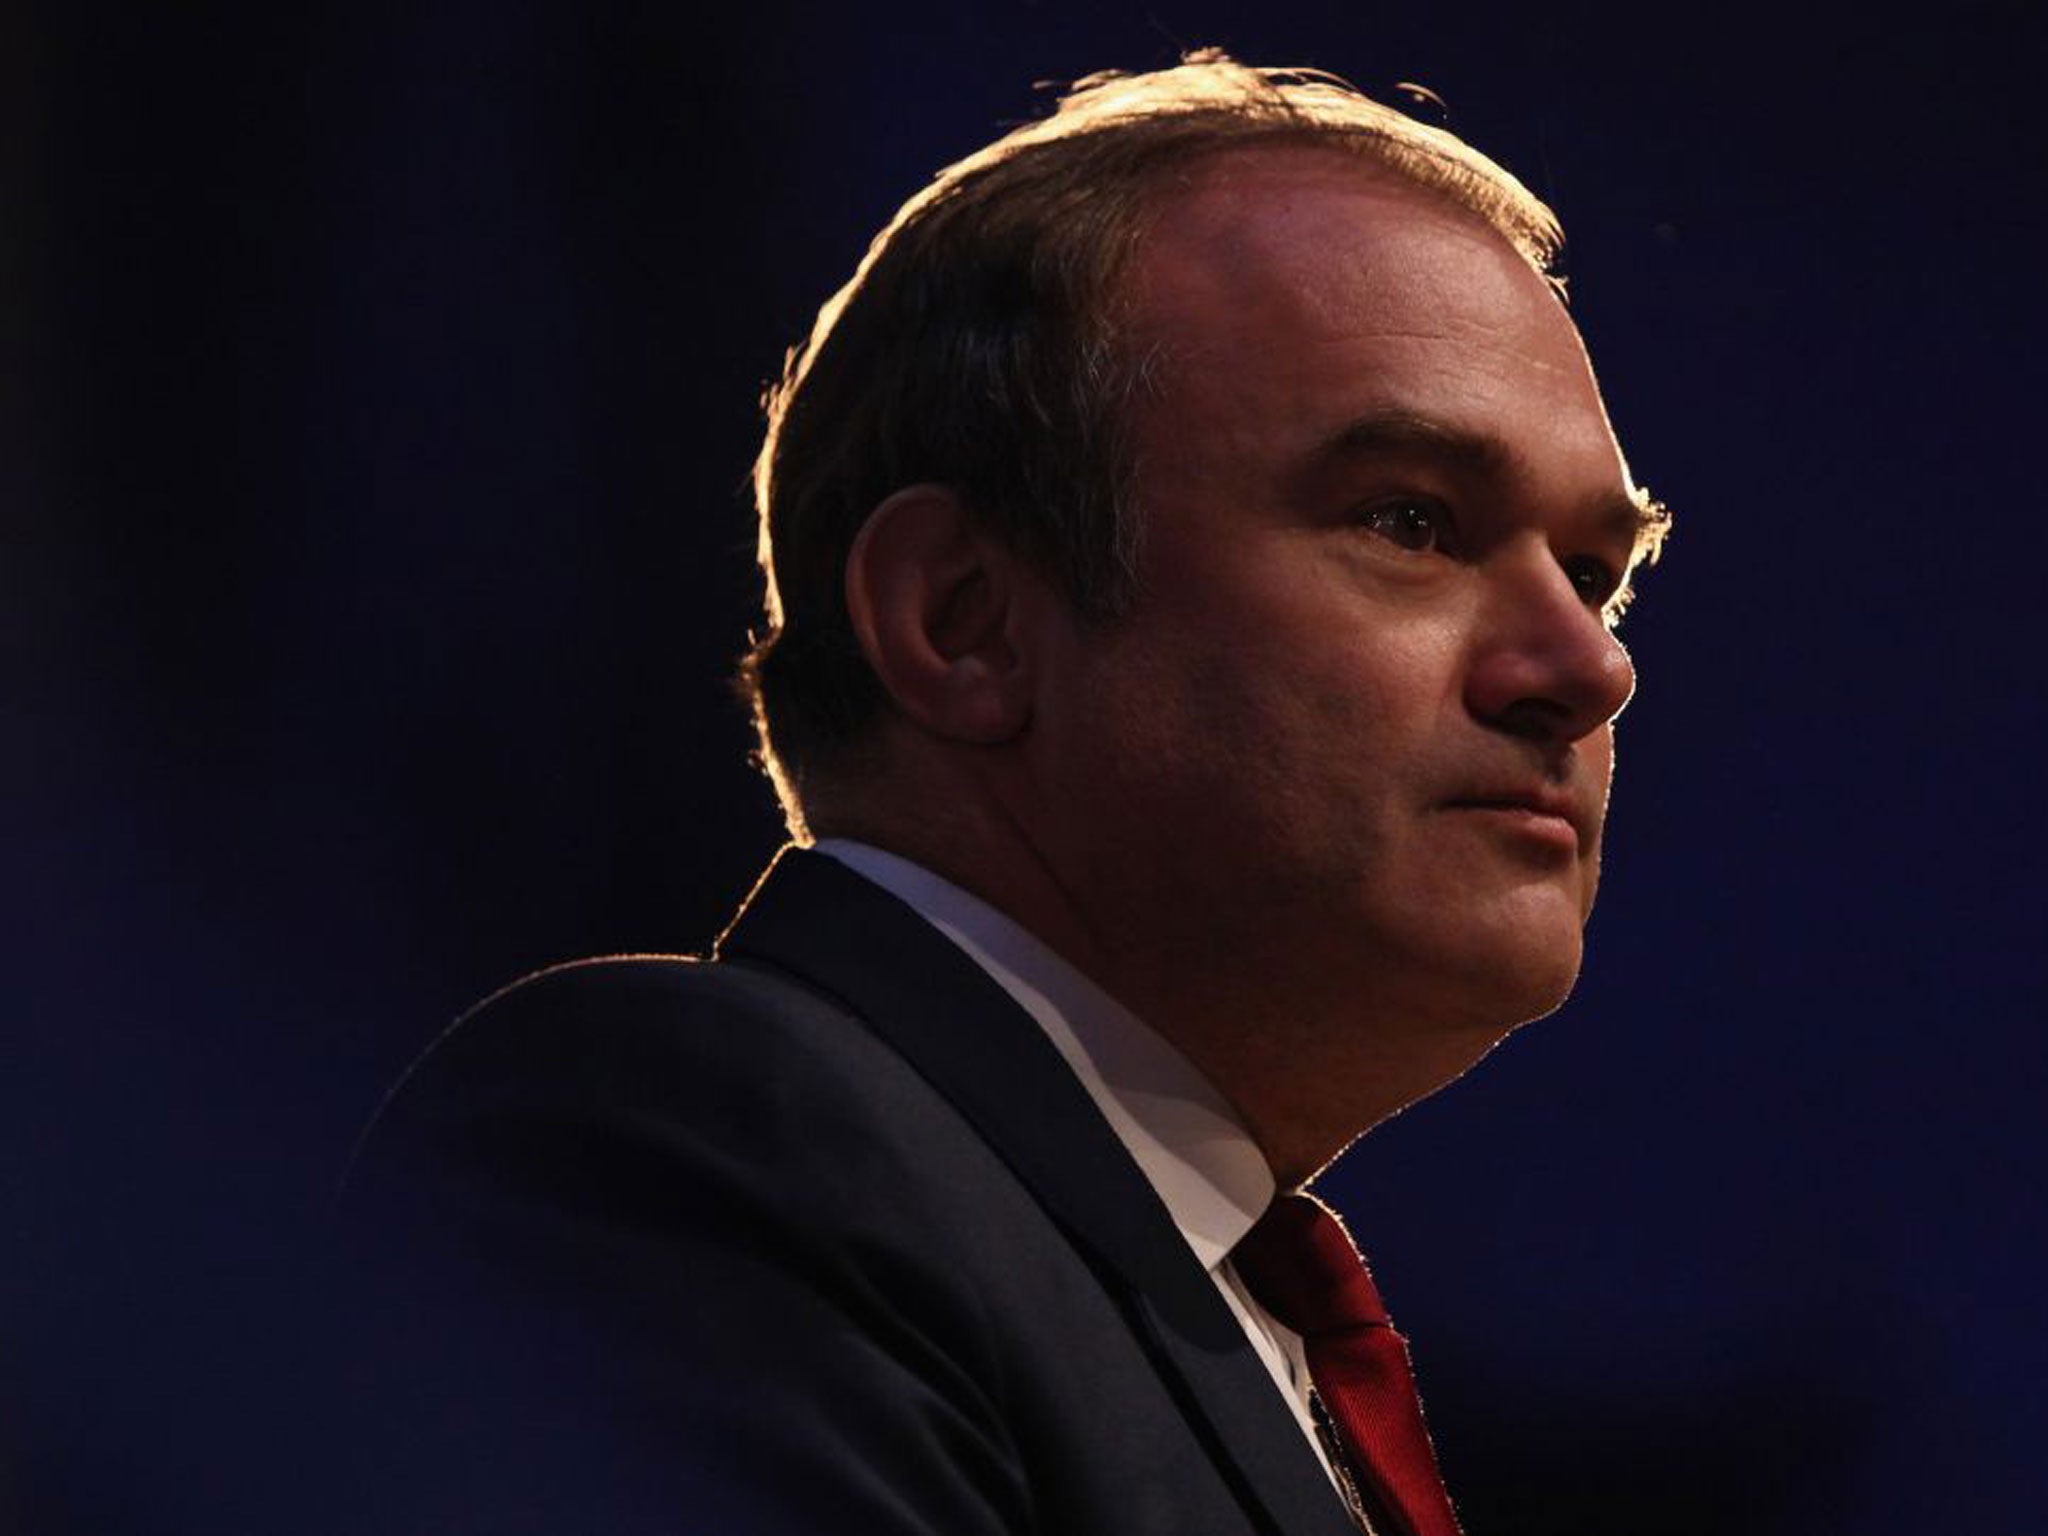 Ed Davey has dismissed Labour leader Ed Miliband’s suggestion that a two-year price freeze would solve the issue of soaring energy bills